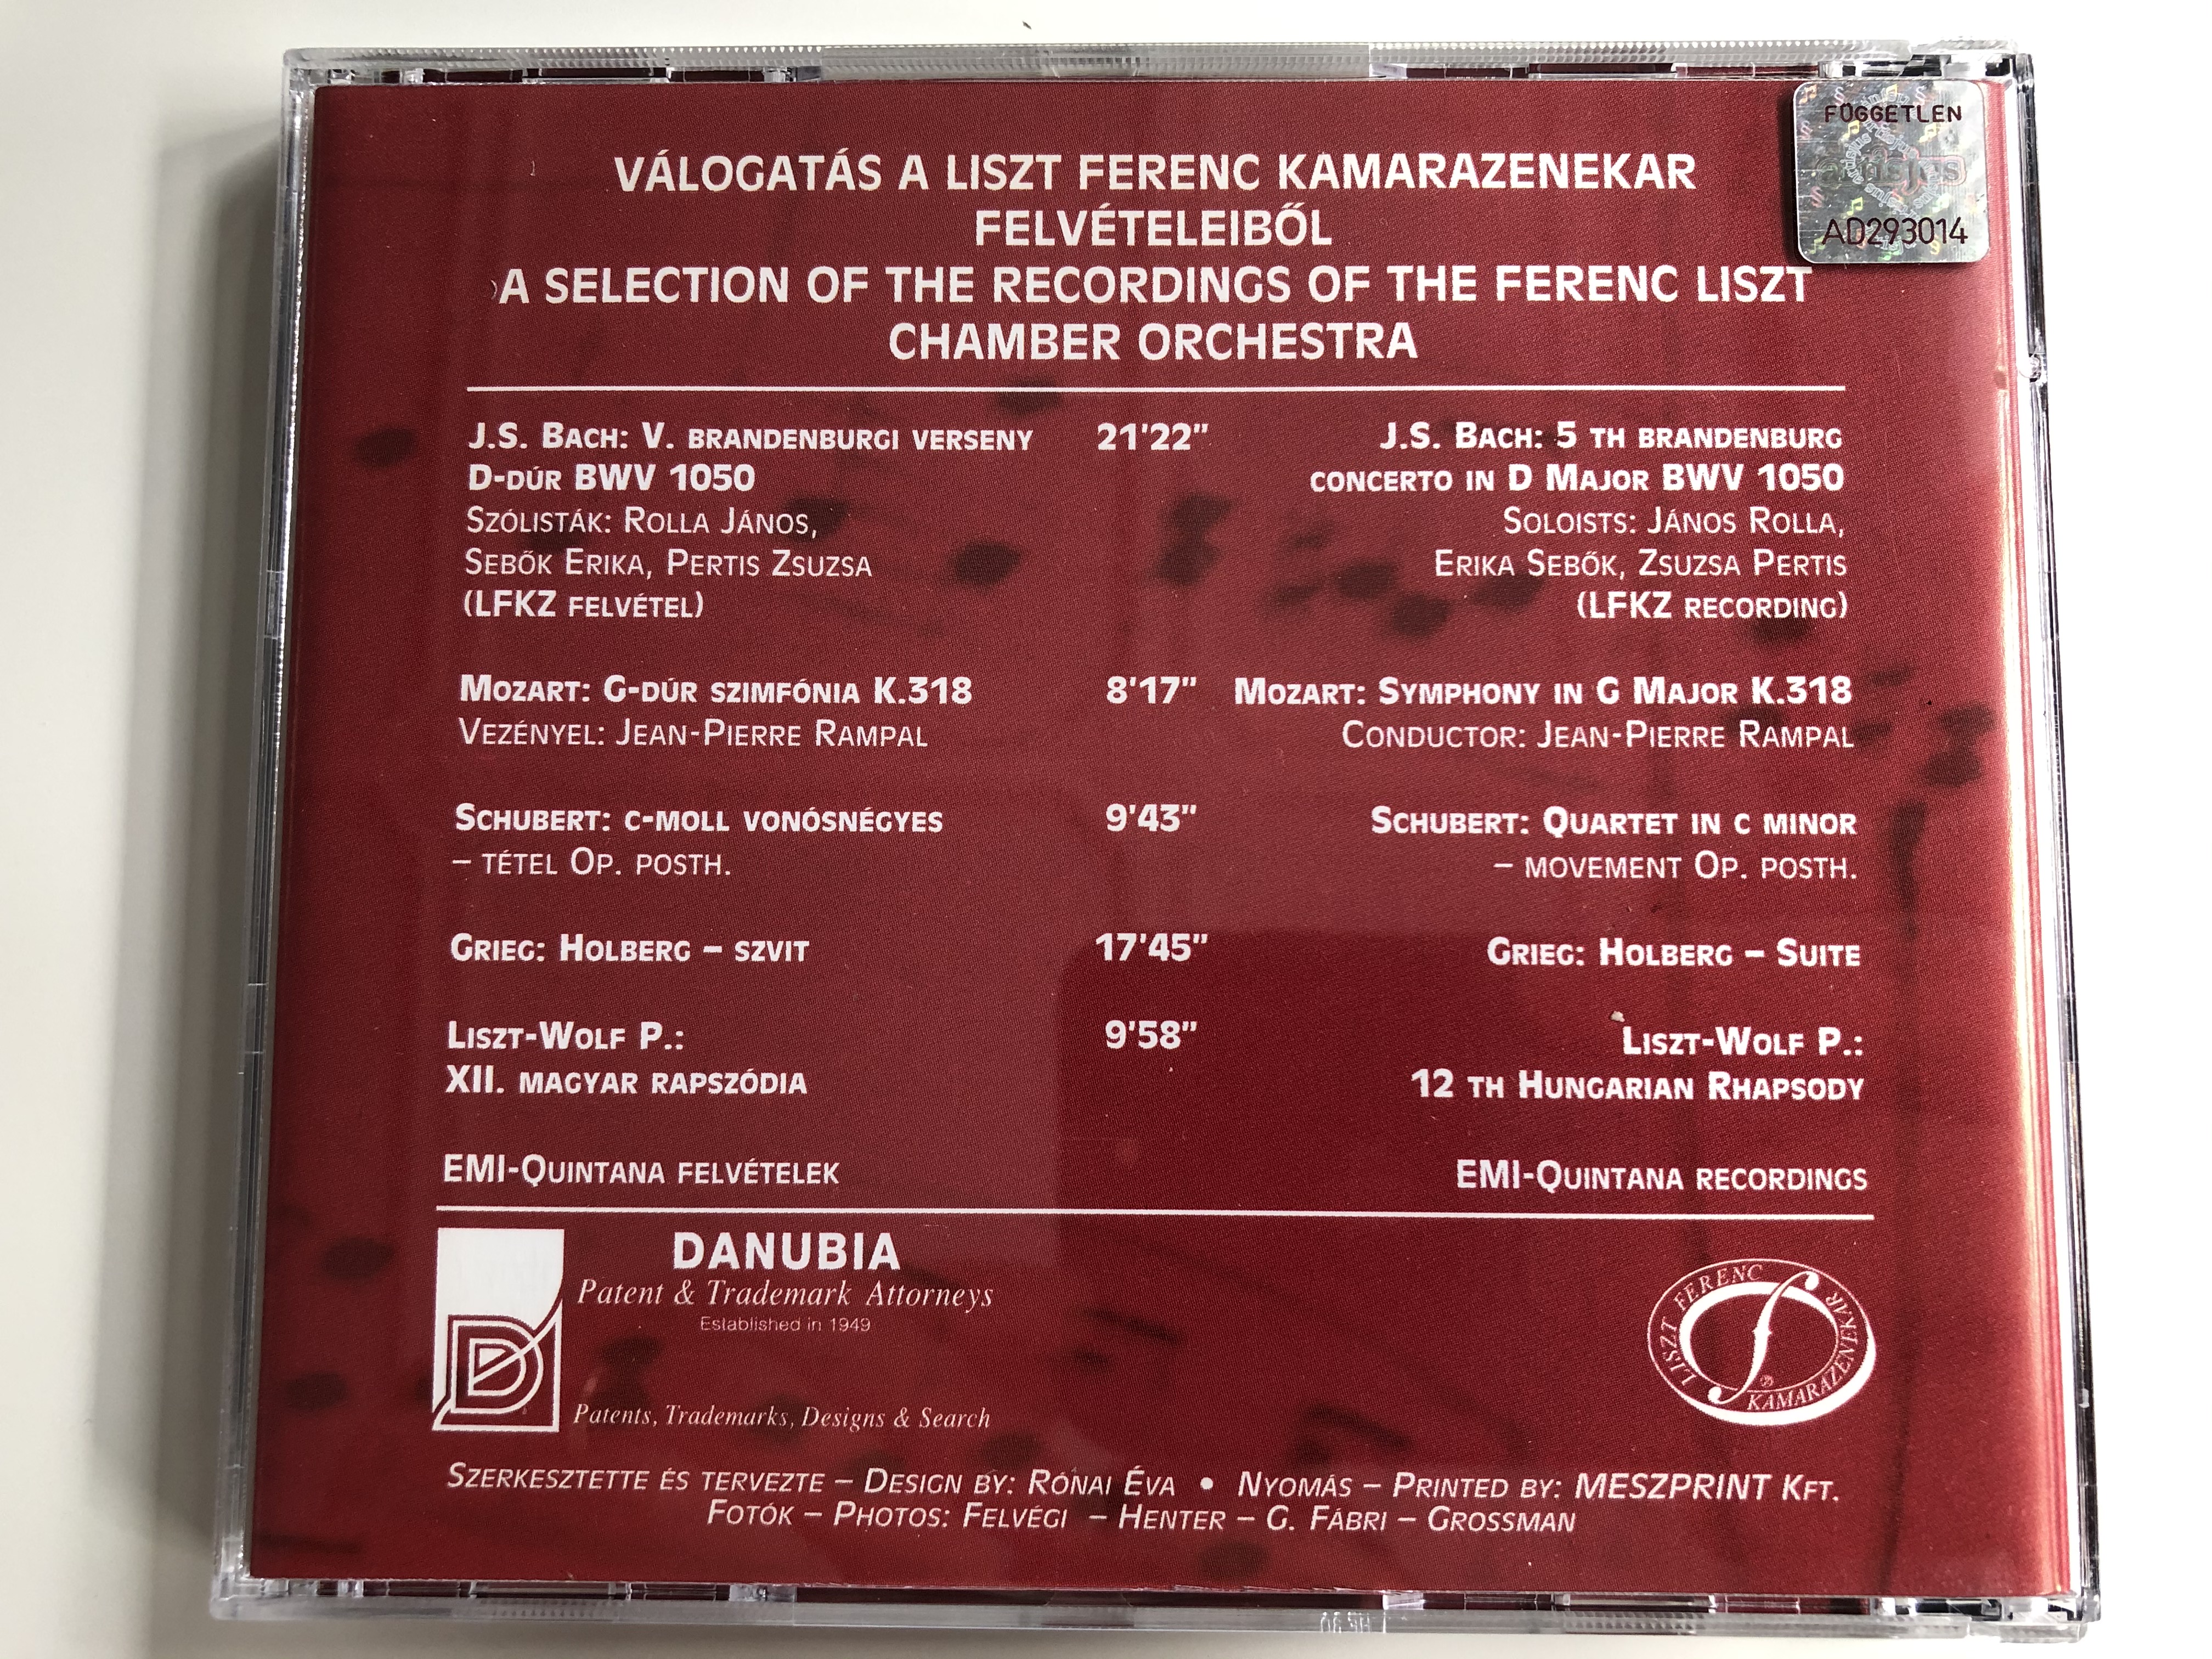 the-ferenc-liszt-chamber-orchestra-is-35-years-old-with-compliments-danubia-patent-and-trademark-attorneys-danubia-audio-cd-1998-lcfo-002-8-.jpg